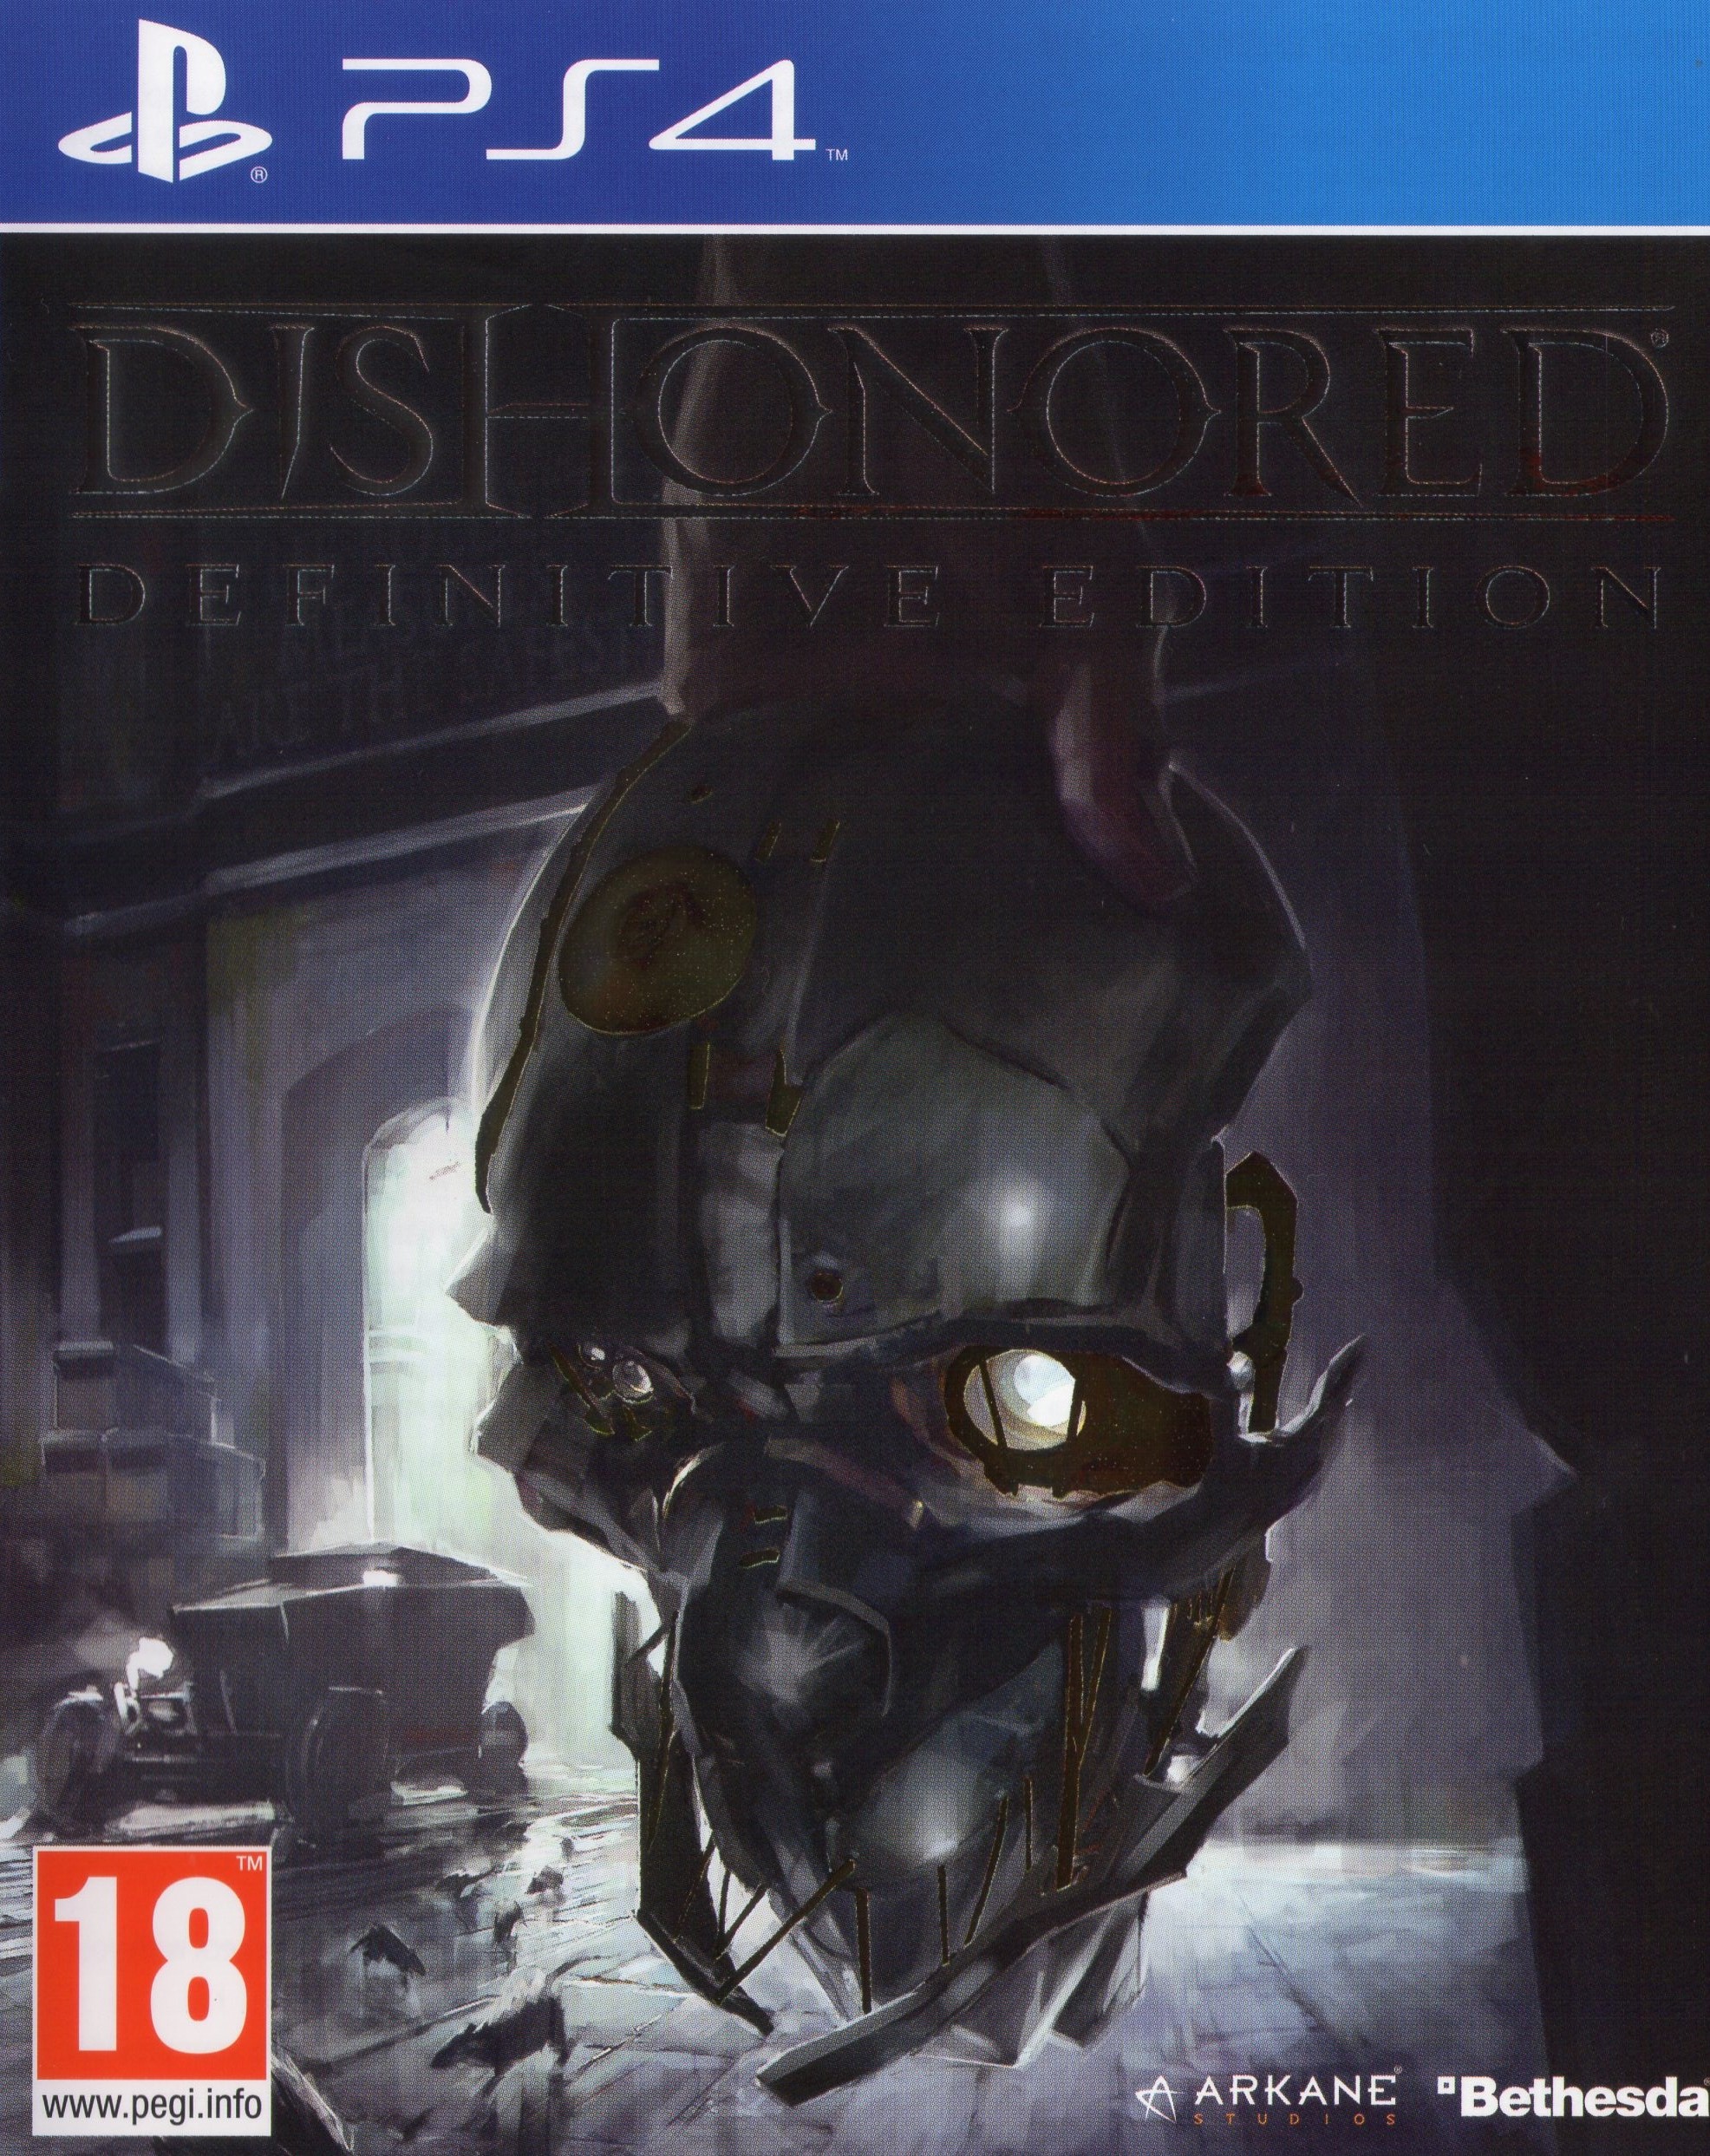 'Dishonored - Definitive Edition'